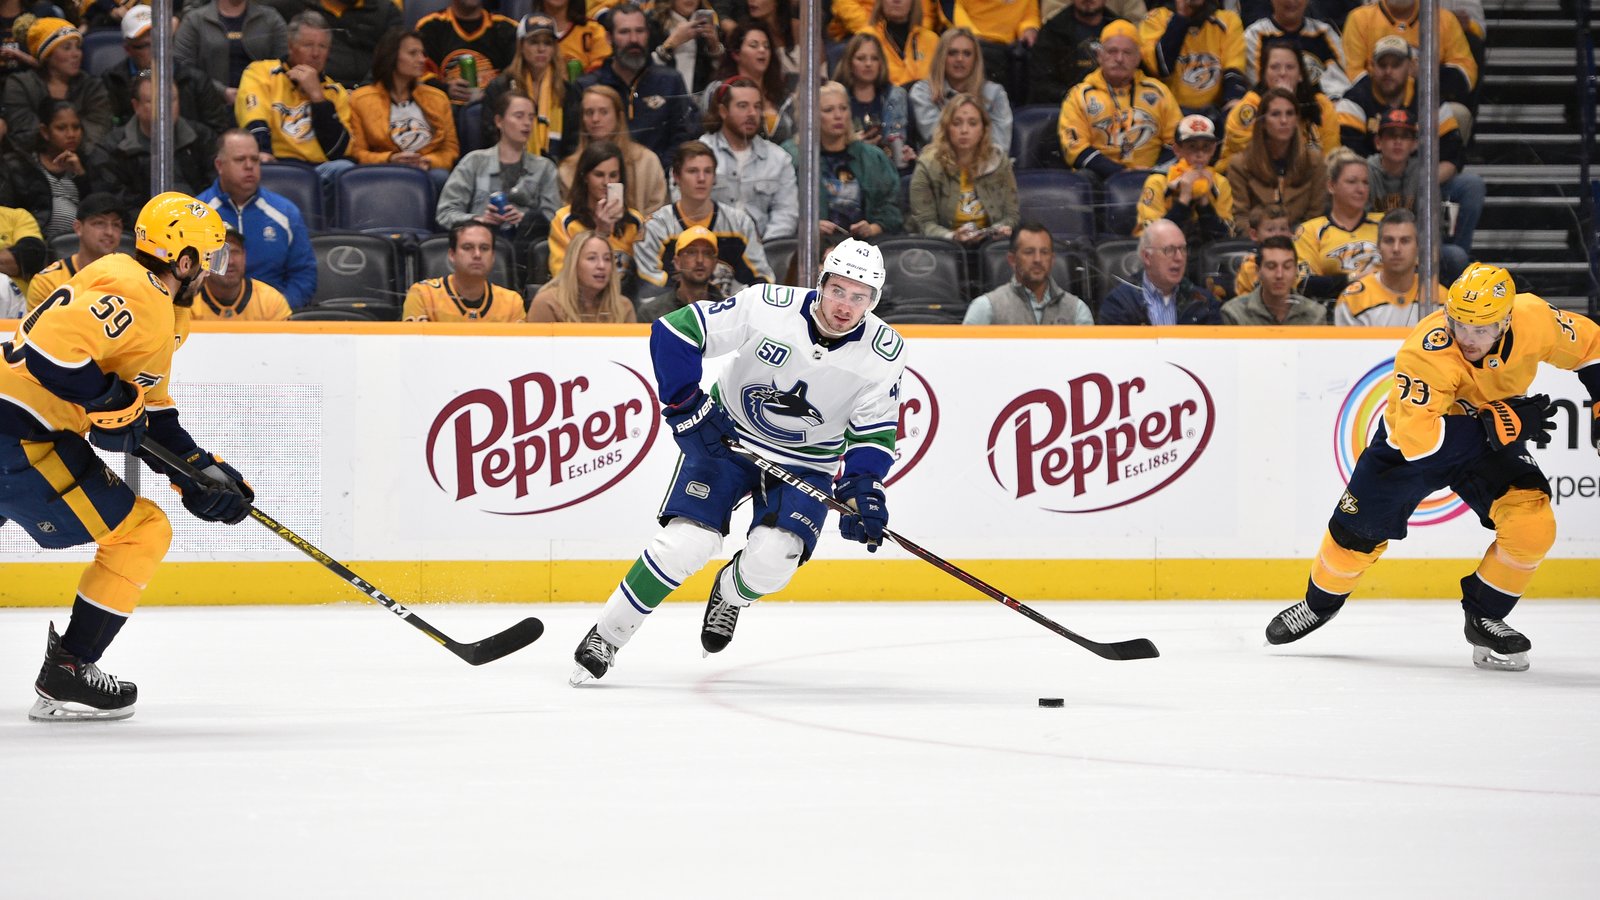 Quinn Hughes cementing his place in NHL history